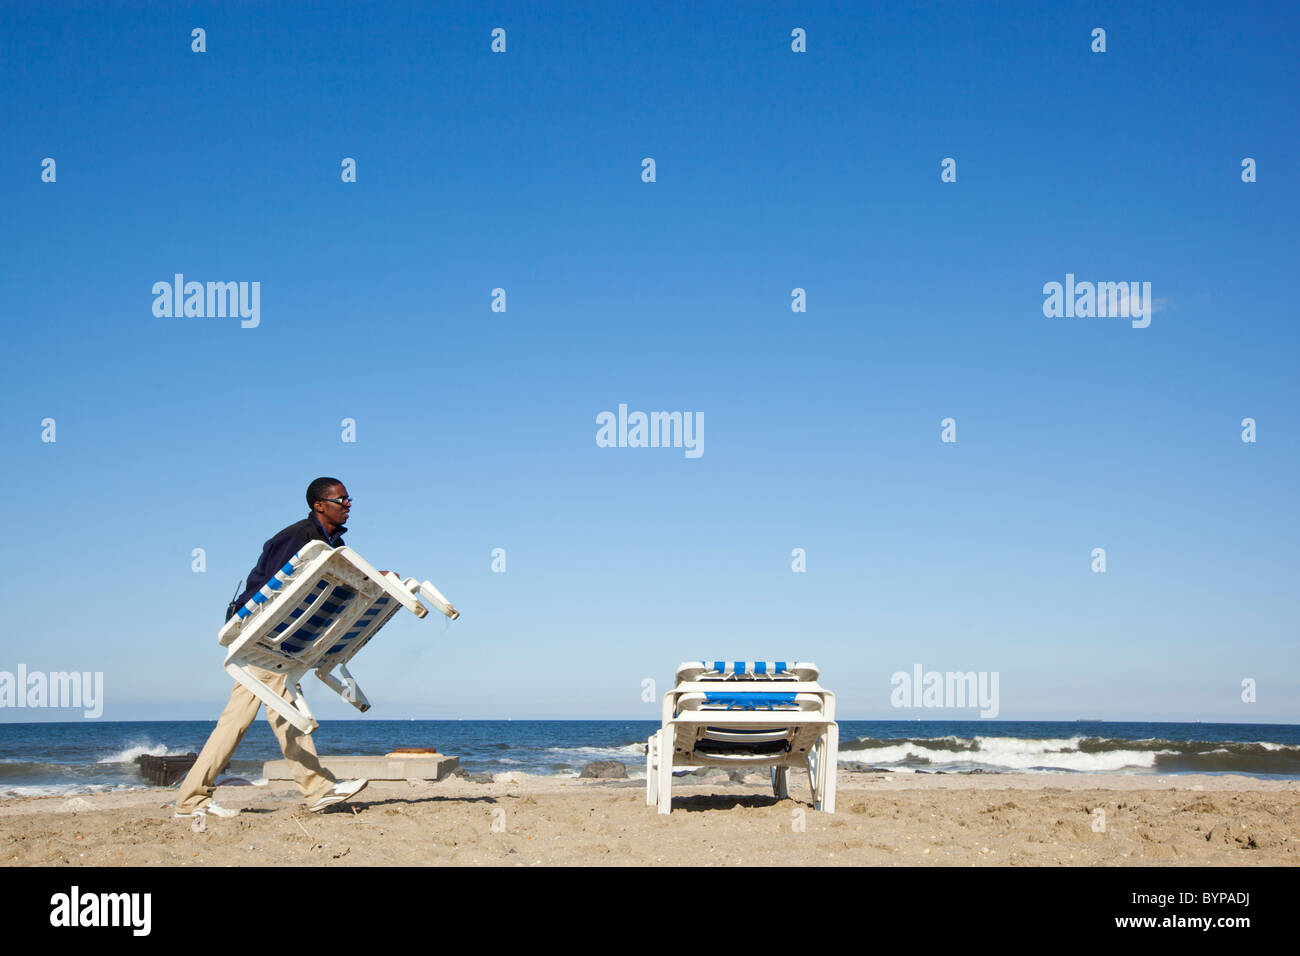 USA, New Jersey, Monmouth Beach, Young man collects resort beach chairs on empty beach on cool early summer afternoon Stock Photo